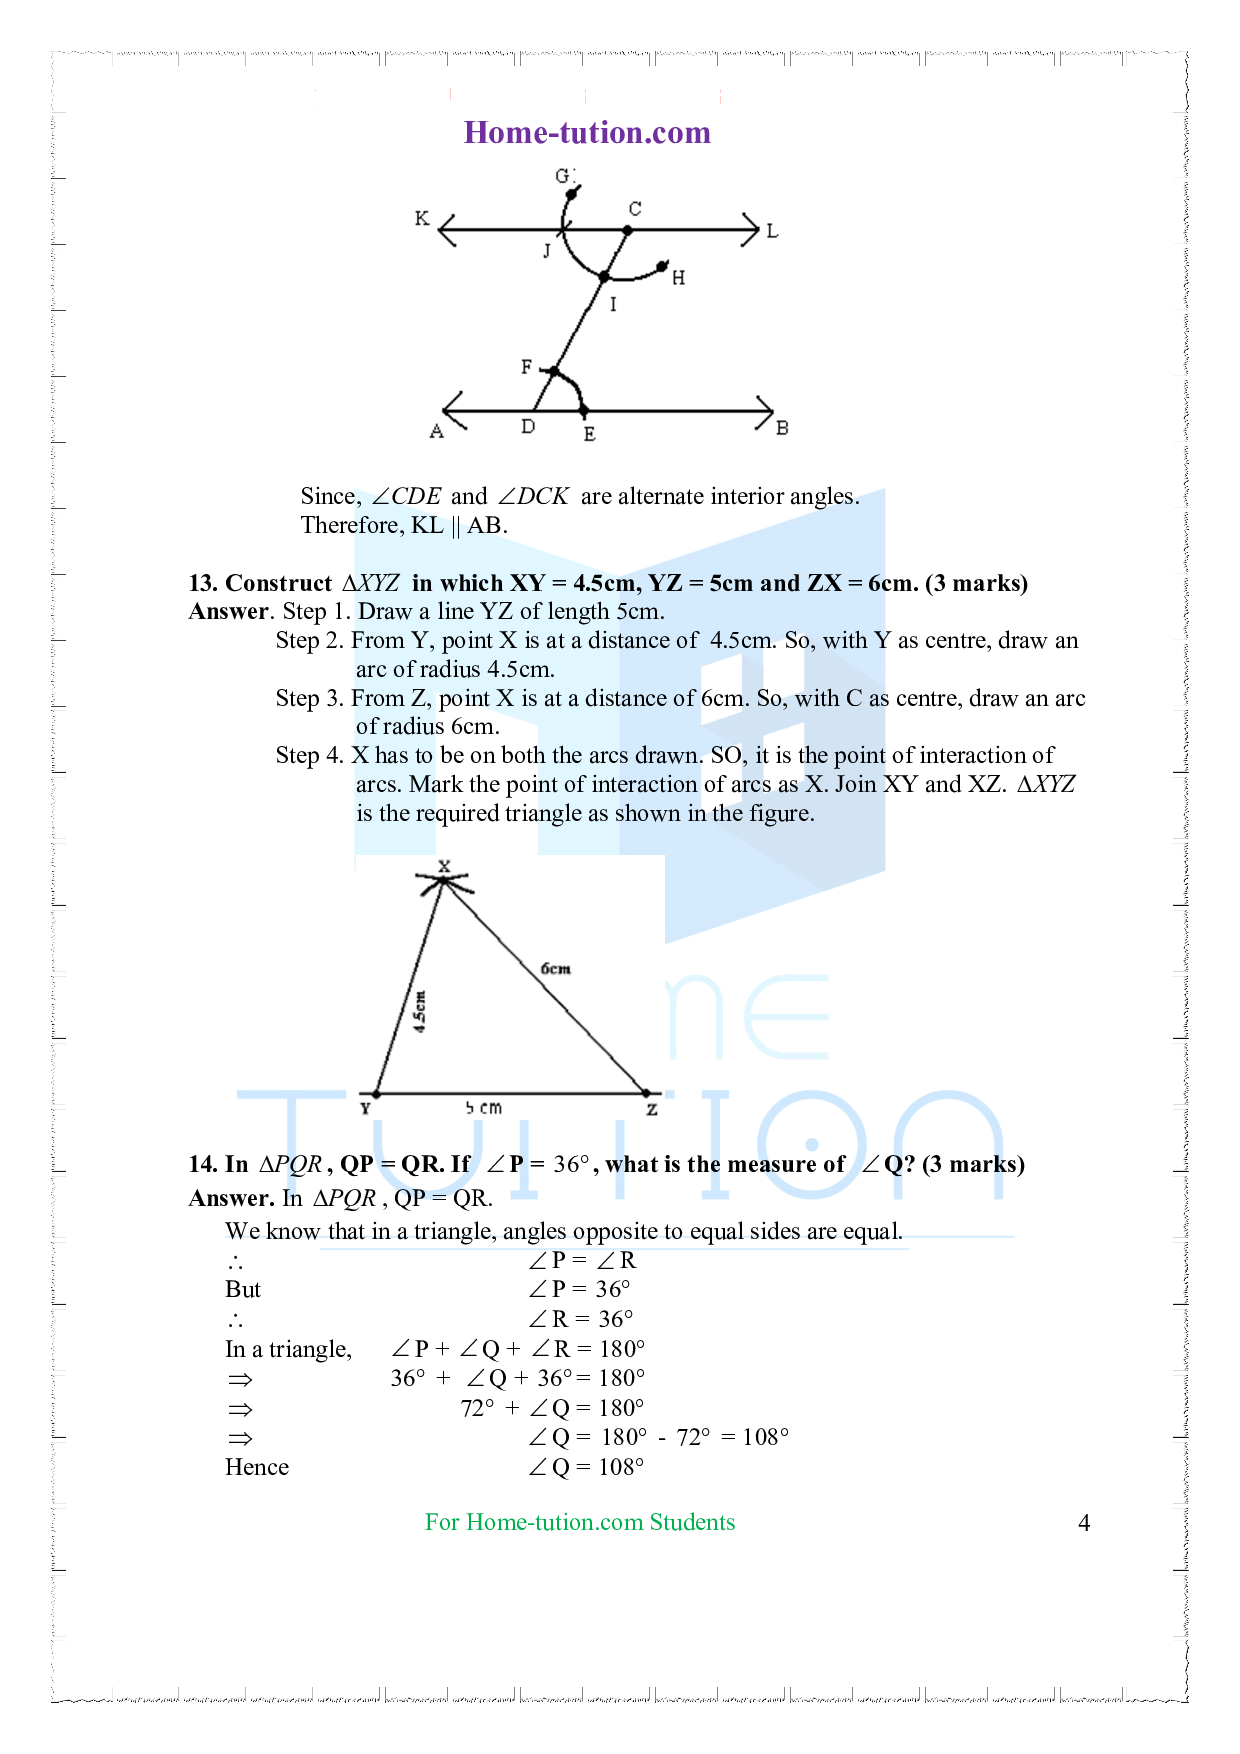 Extra Questions on Class 7 Maths Chapter 10 Practical Geometry